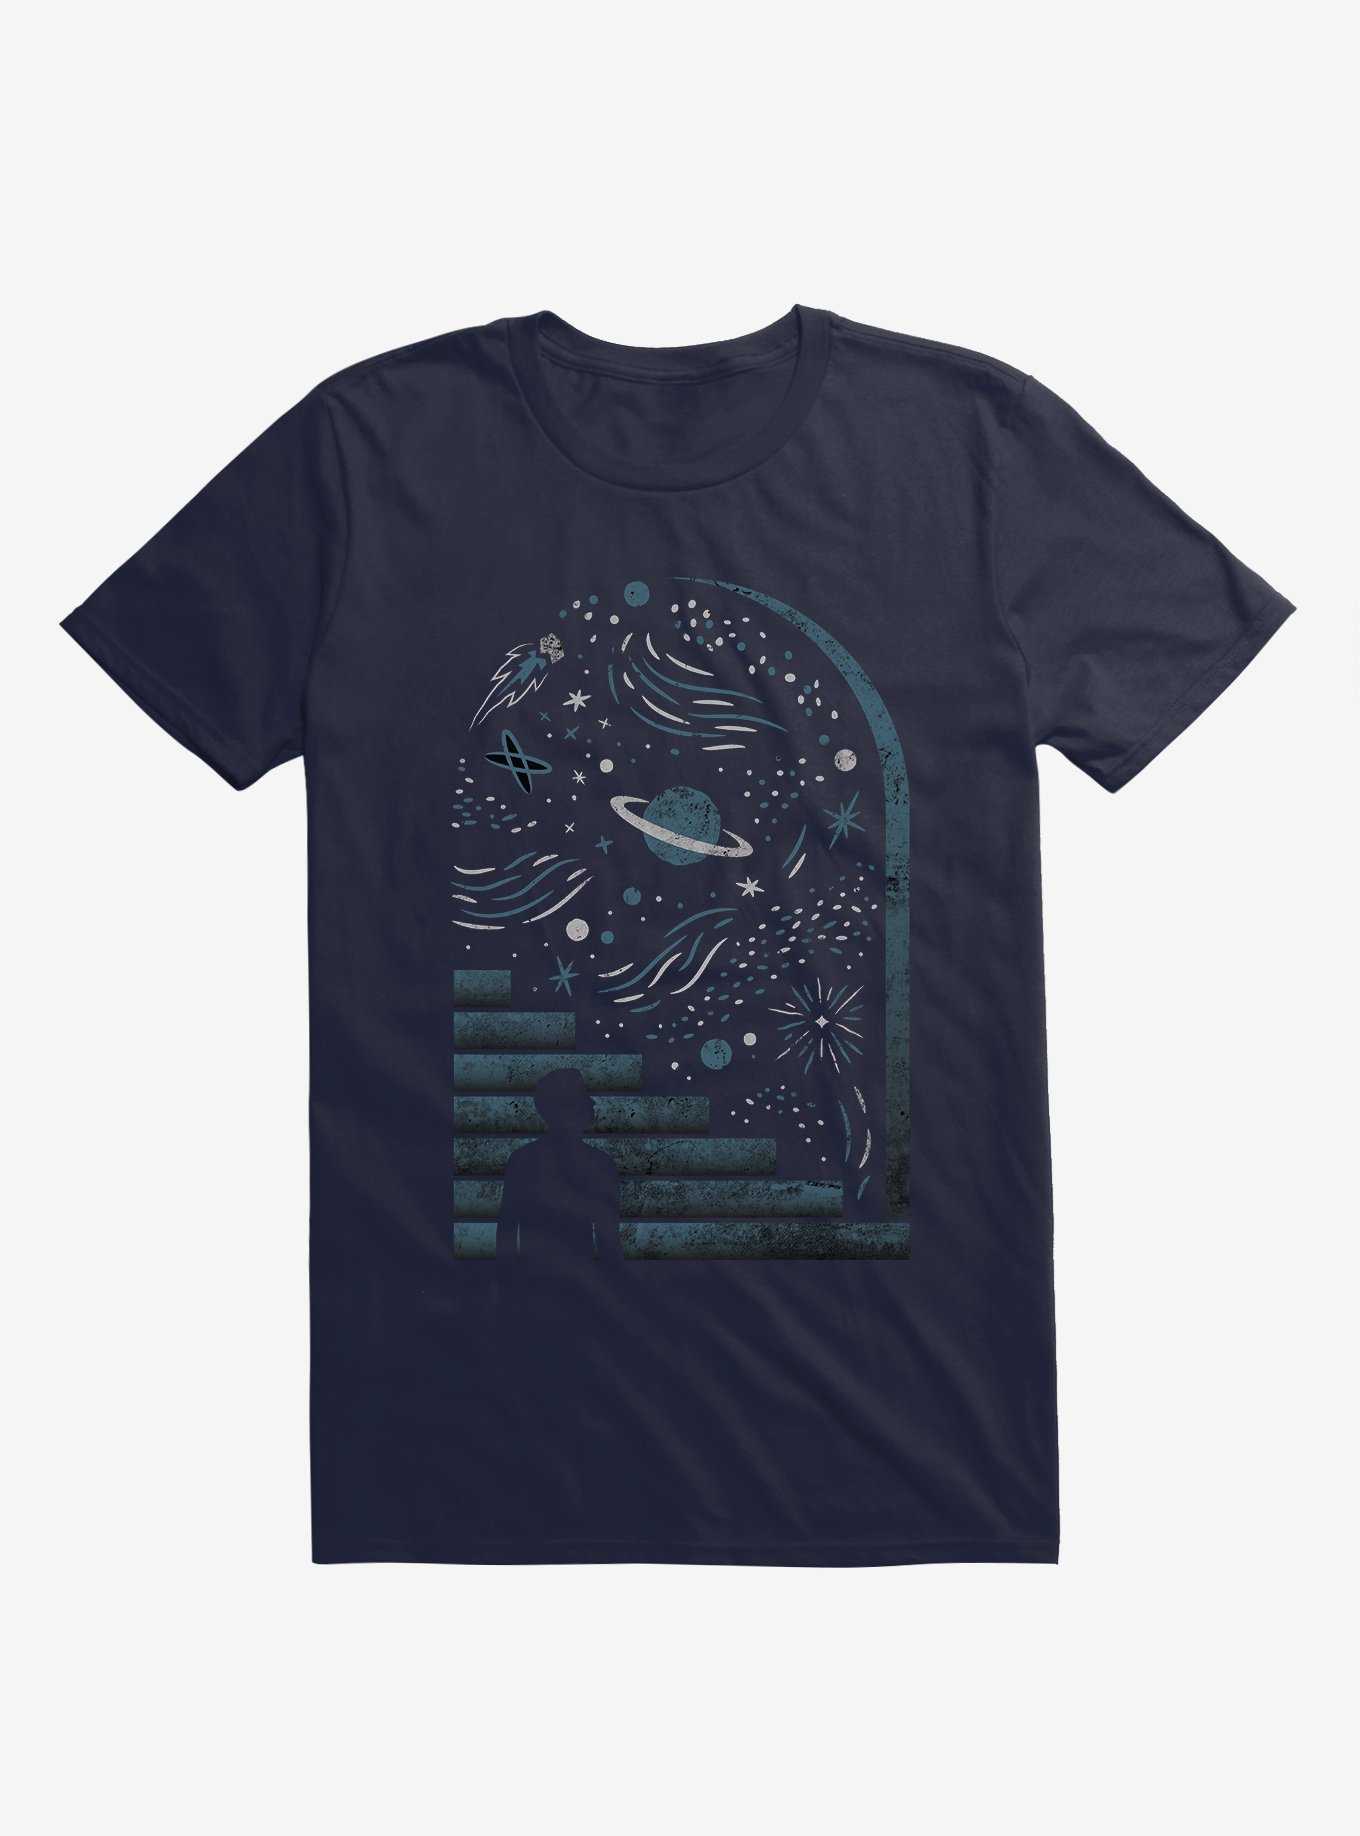 Open Space Stars And Planets Navy Blue T-Shirt, , hi-res